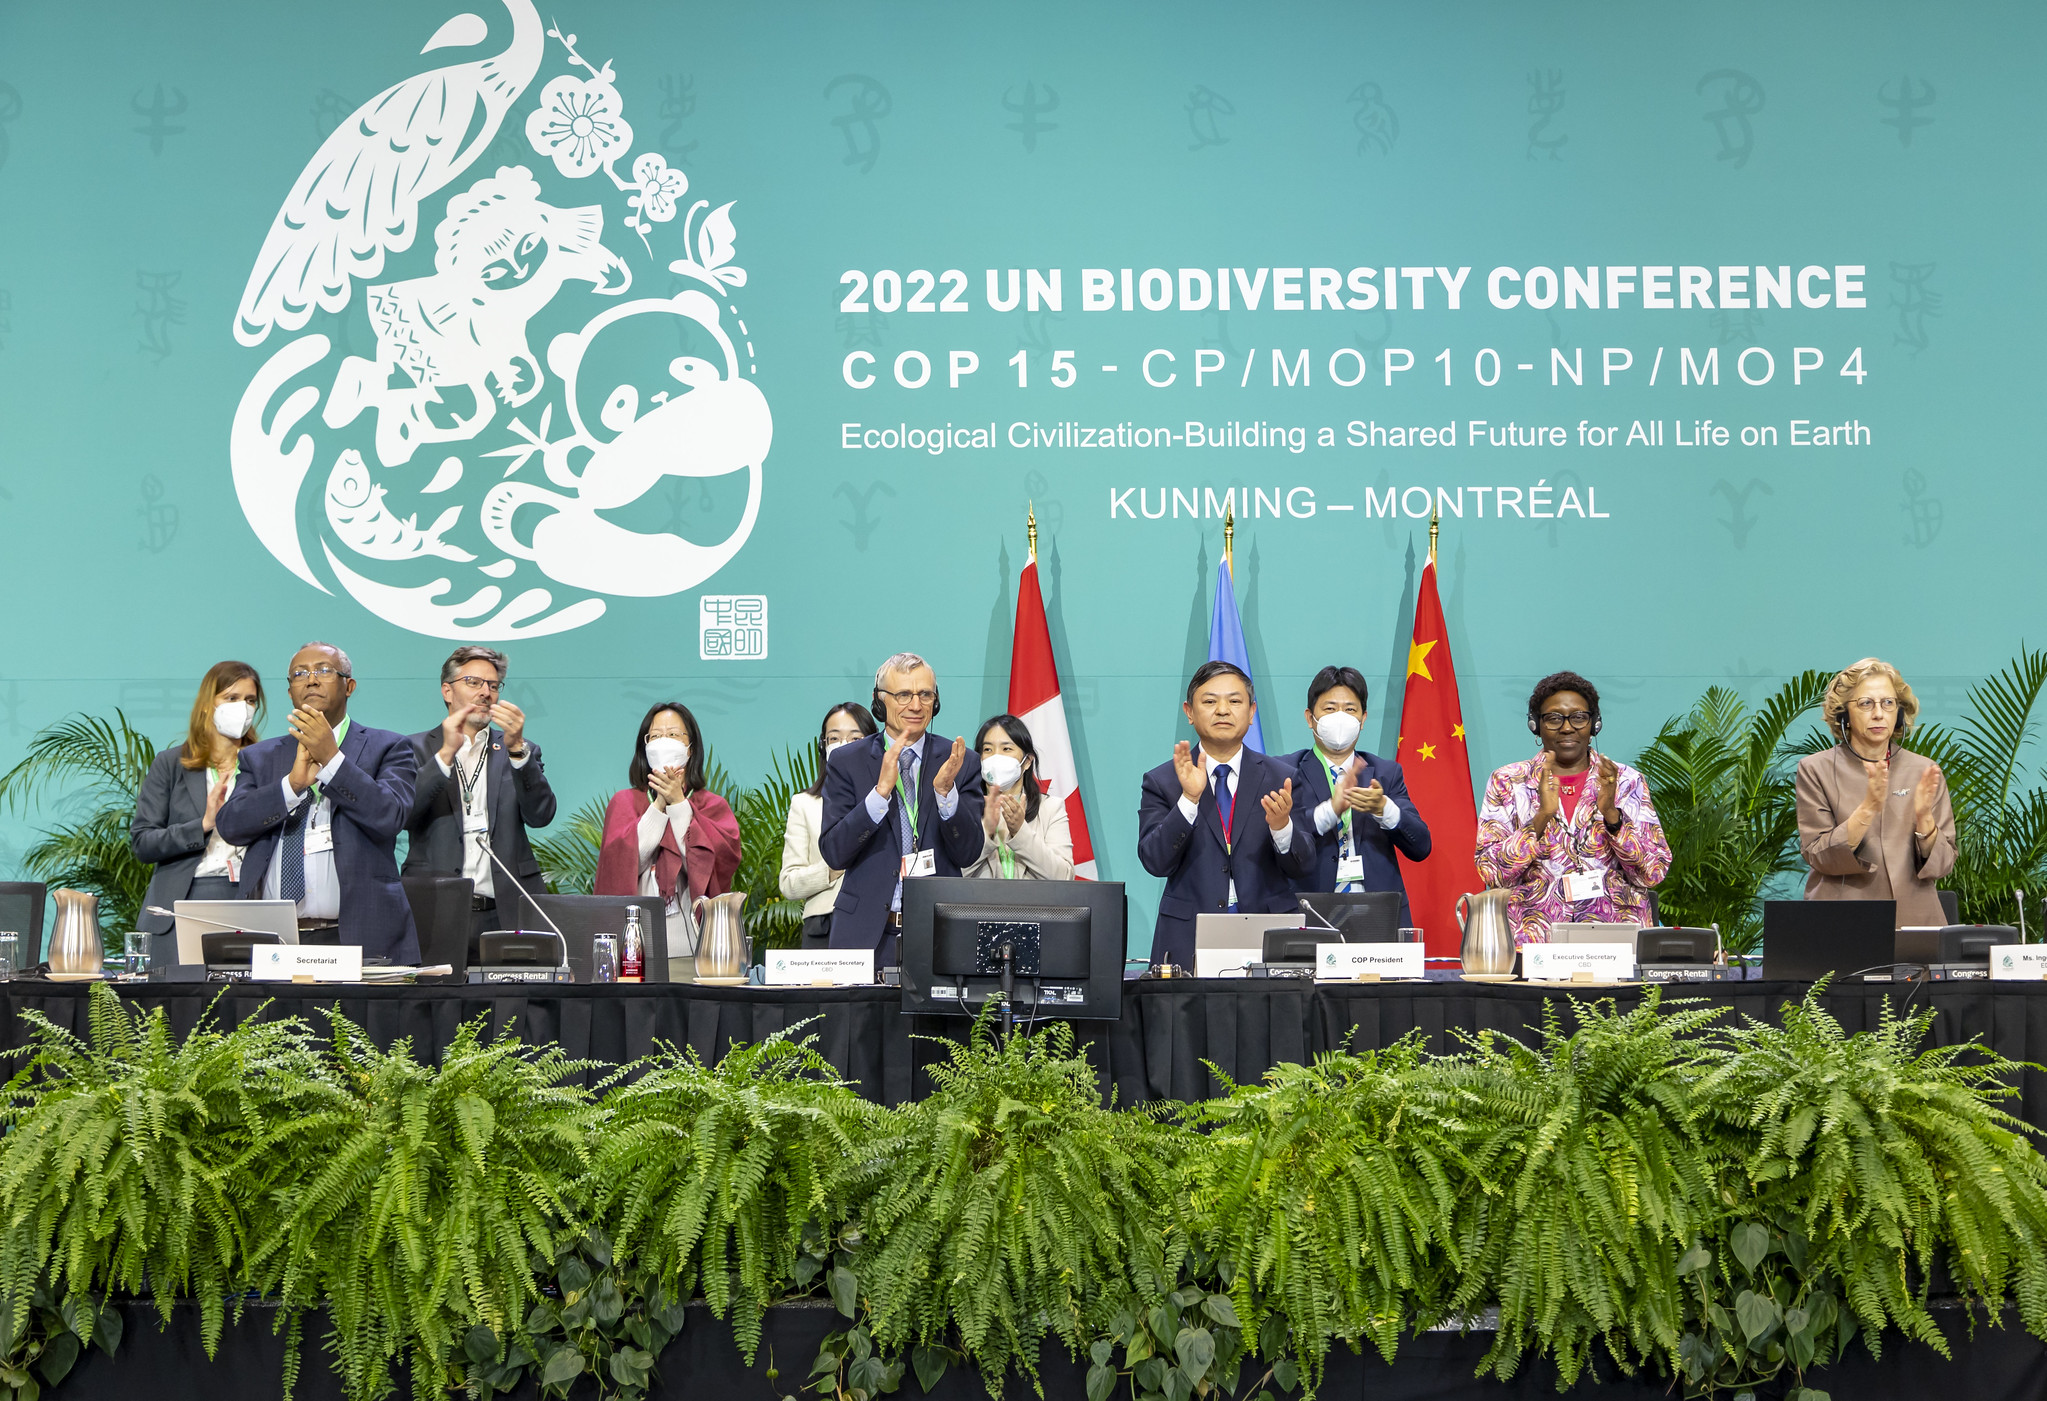 COP15: New global deal for nature agreed